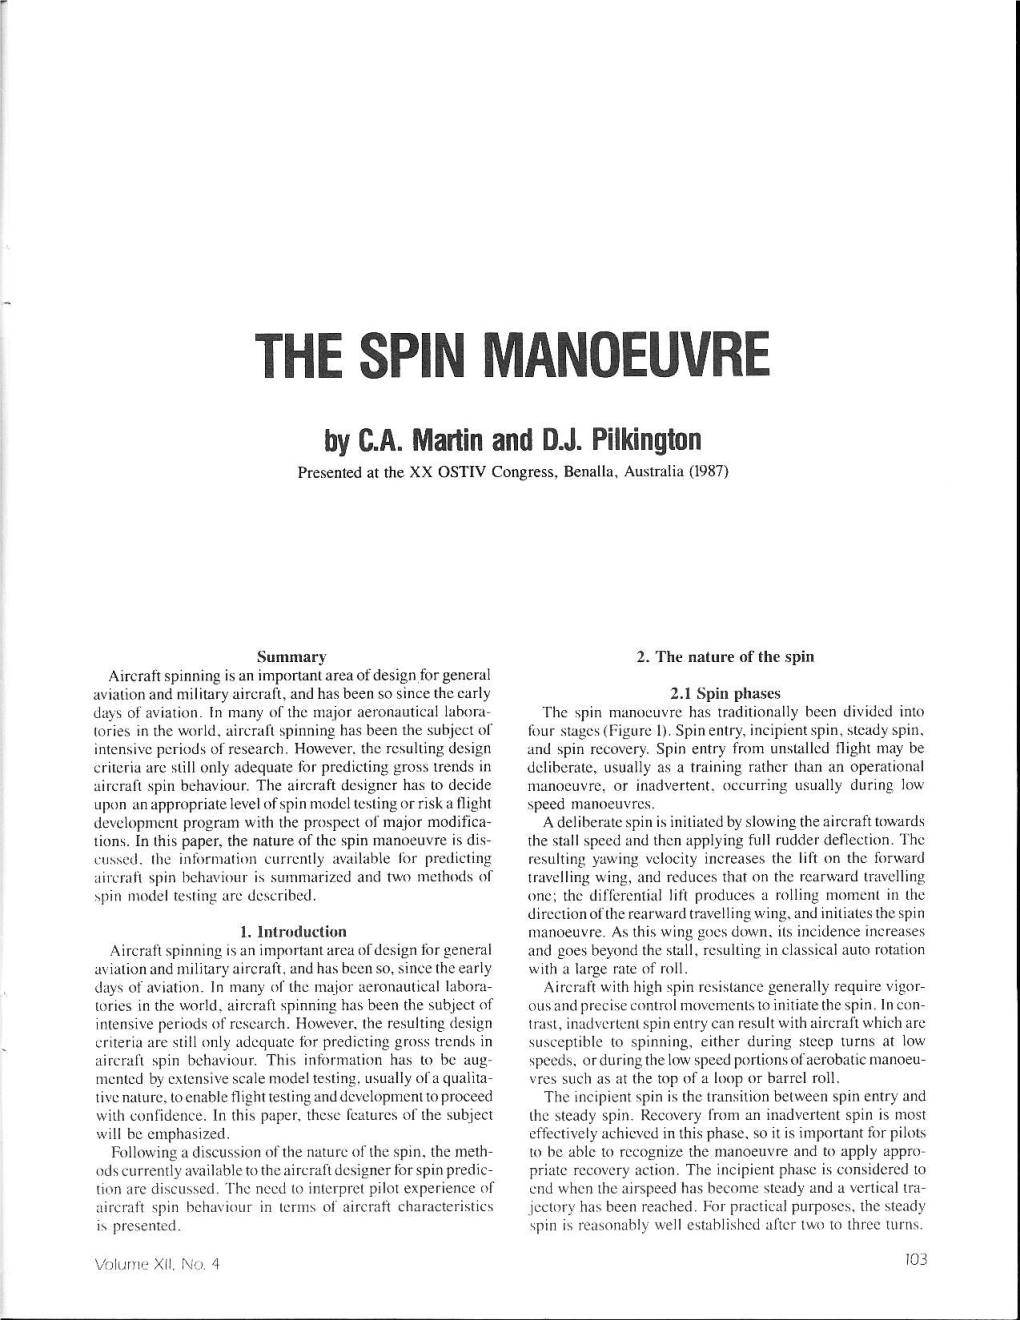 The Spin Manoeuvre